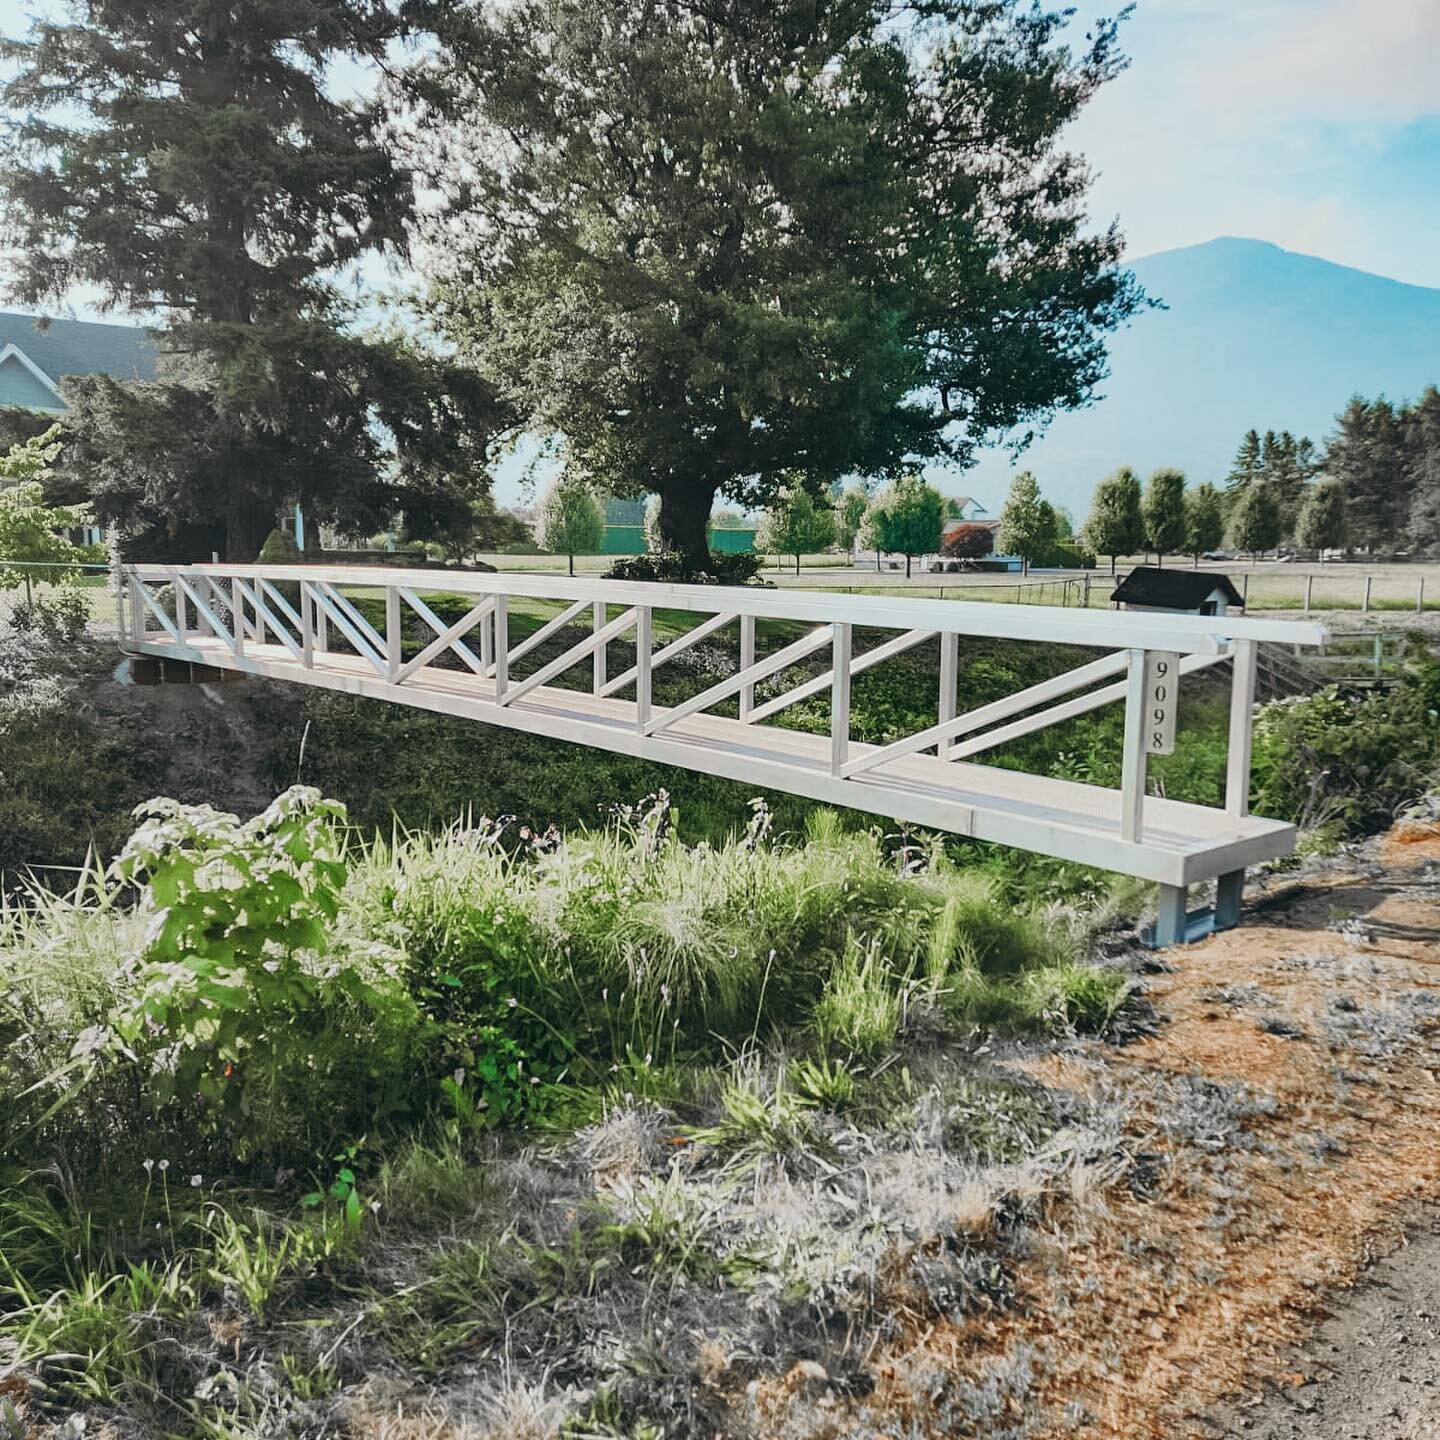 We're proud to showcase our latest project! This bridge was fabricated with precision and care. We are extremely pleased with the result!💯👏🏼

#outlawindustriesltd #custommetalwork #chilliwackfabrication #customfabrication #metalfabrication